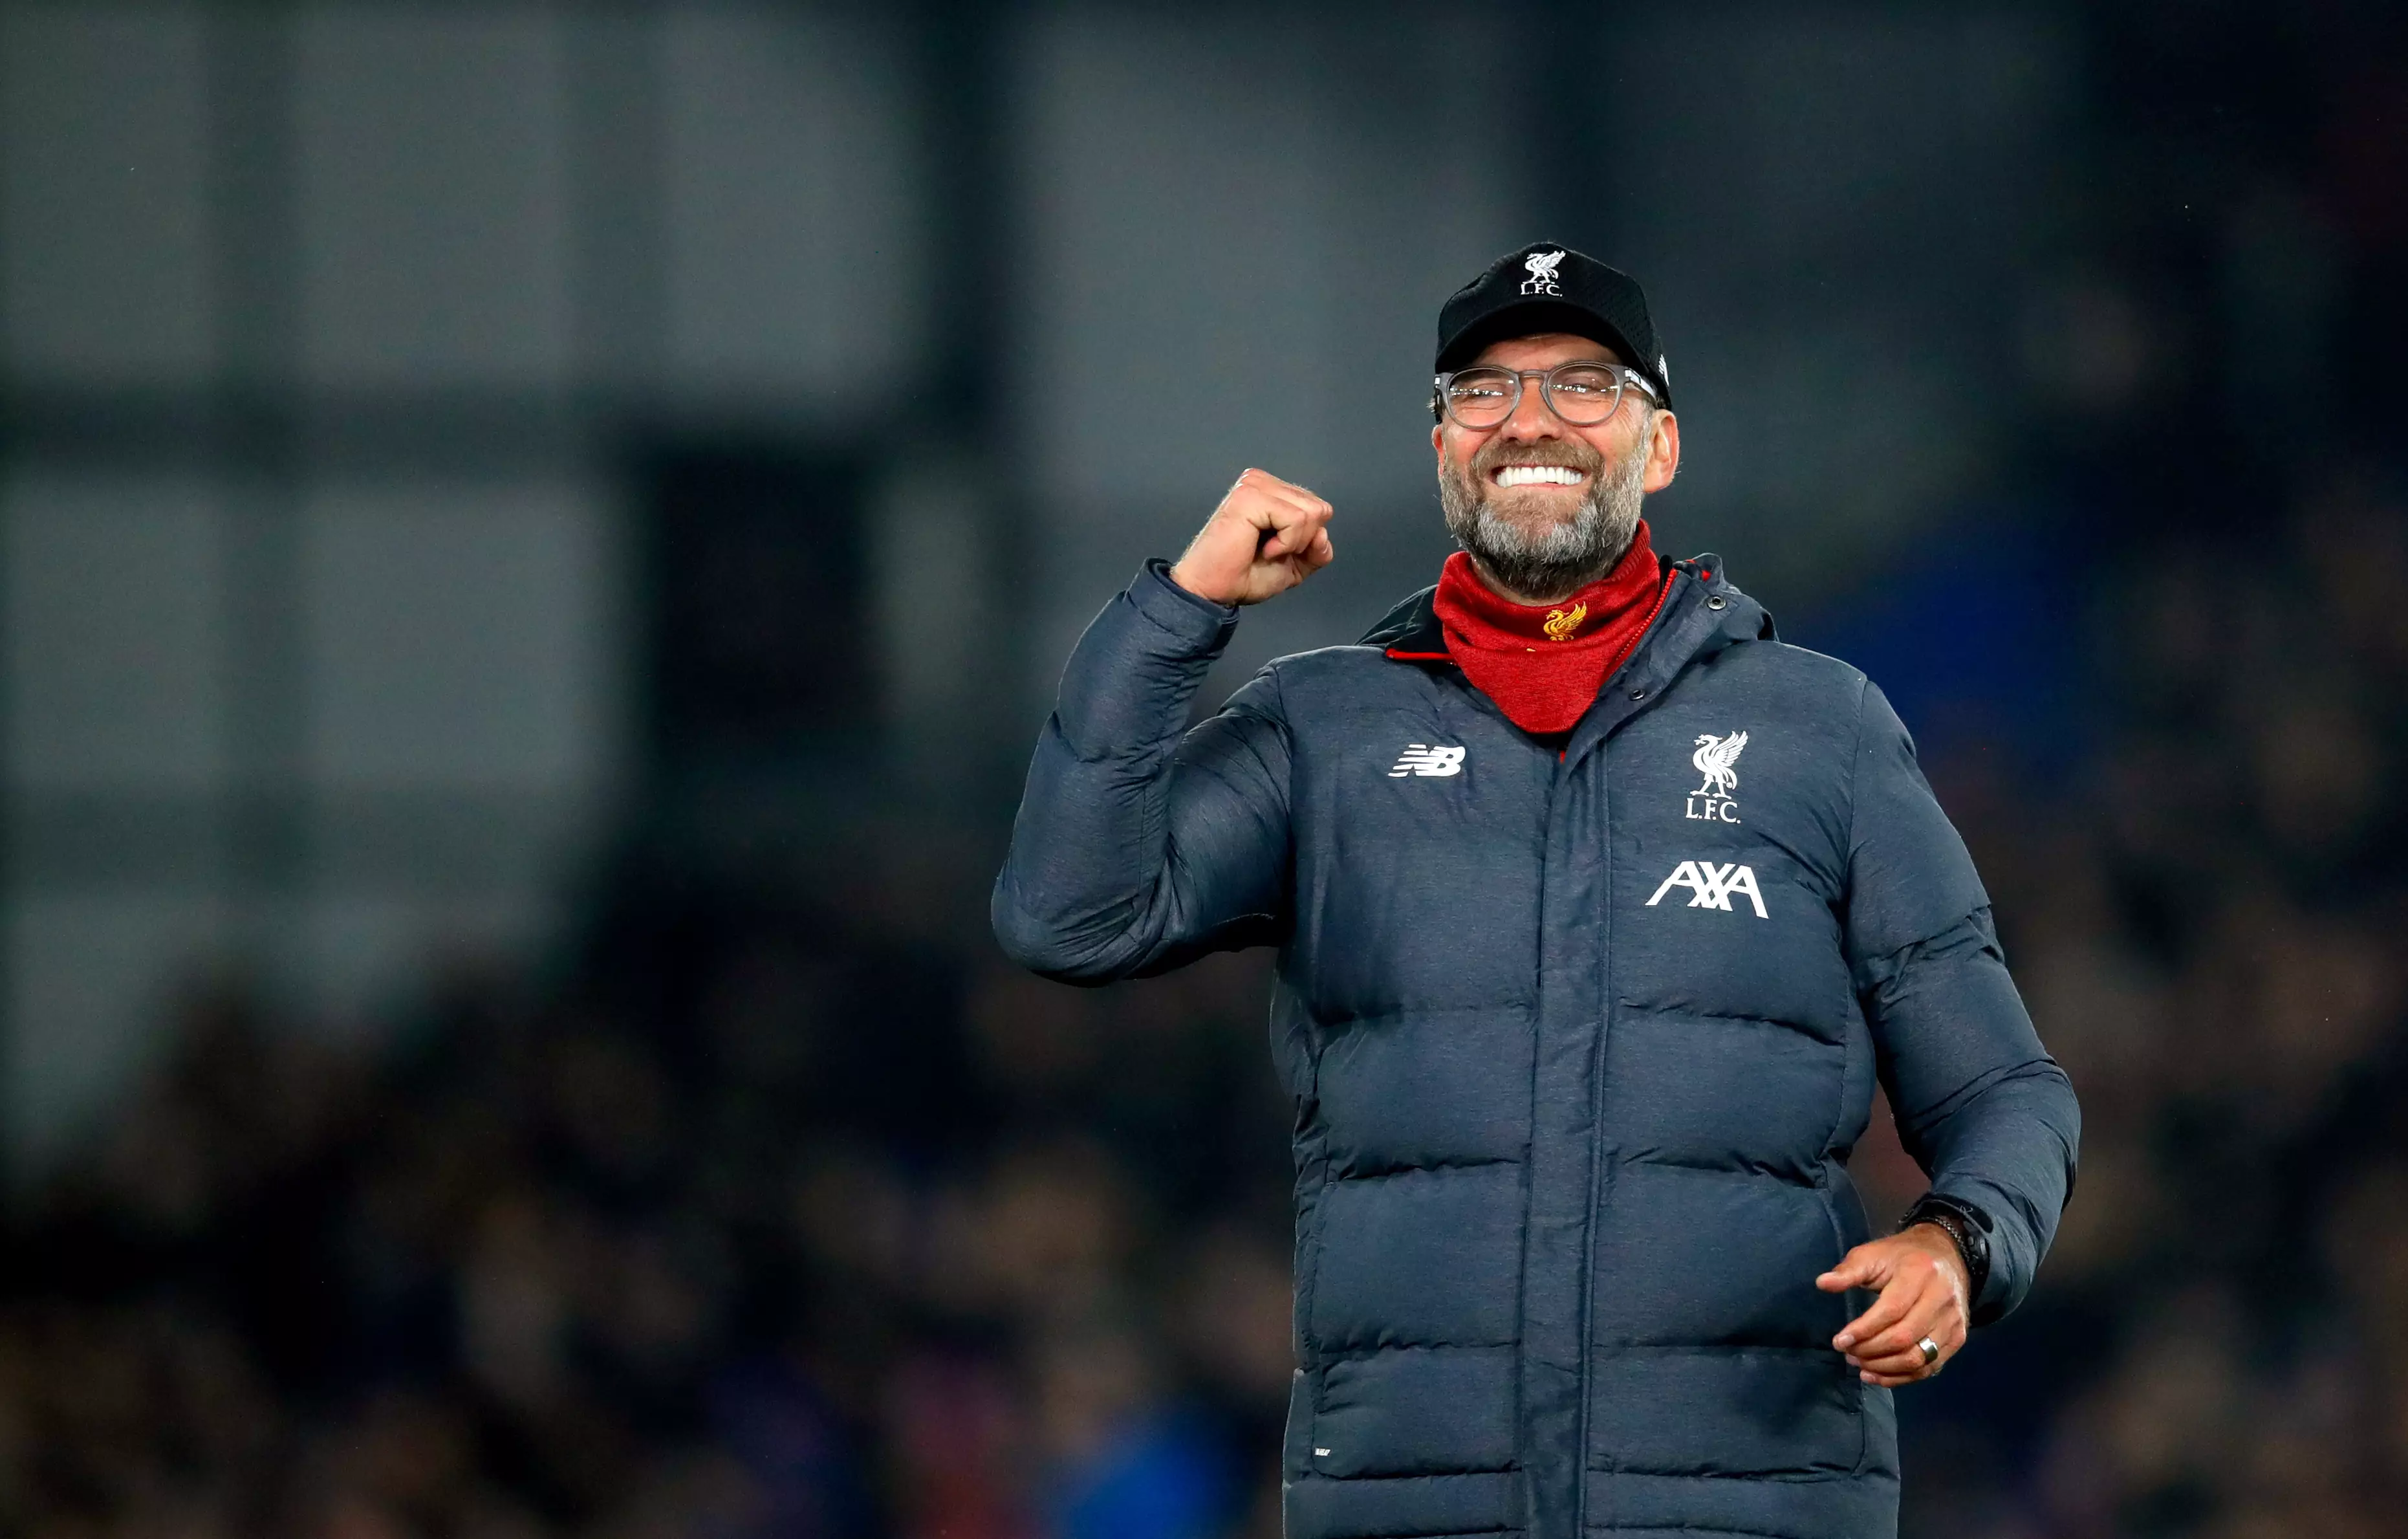 Jurgen Klopp's Liverpool side are eight points clear at the top of the Premier League